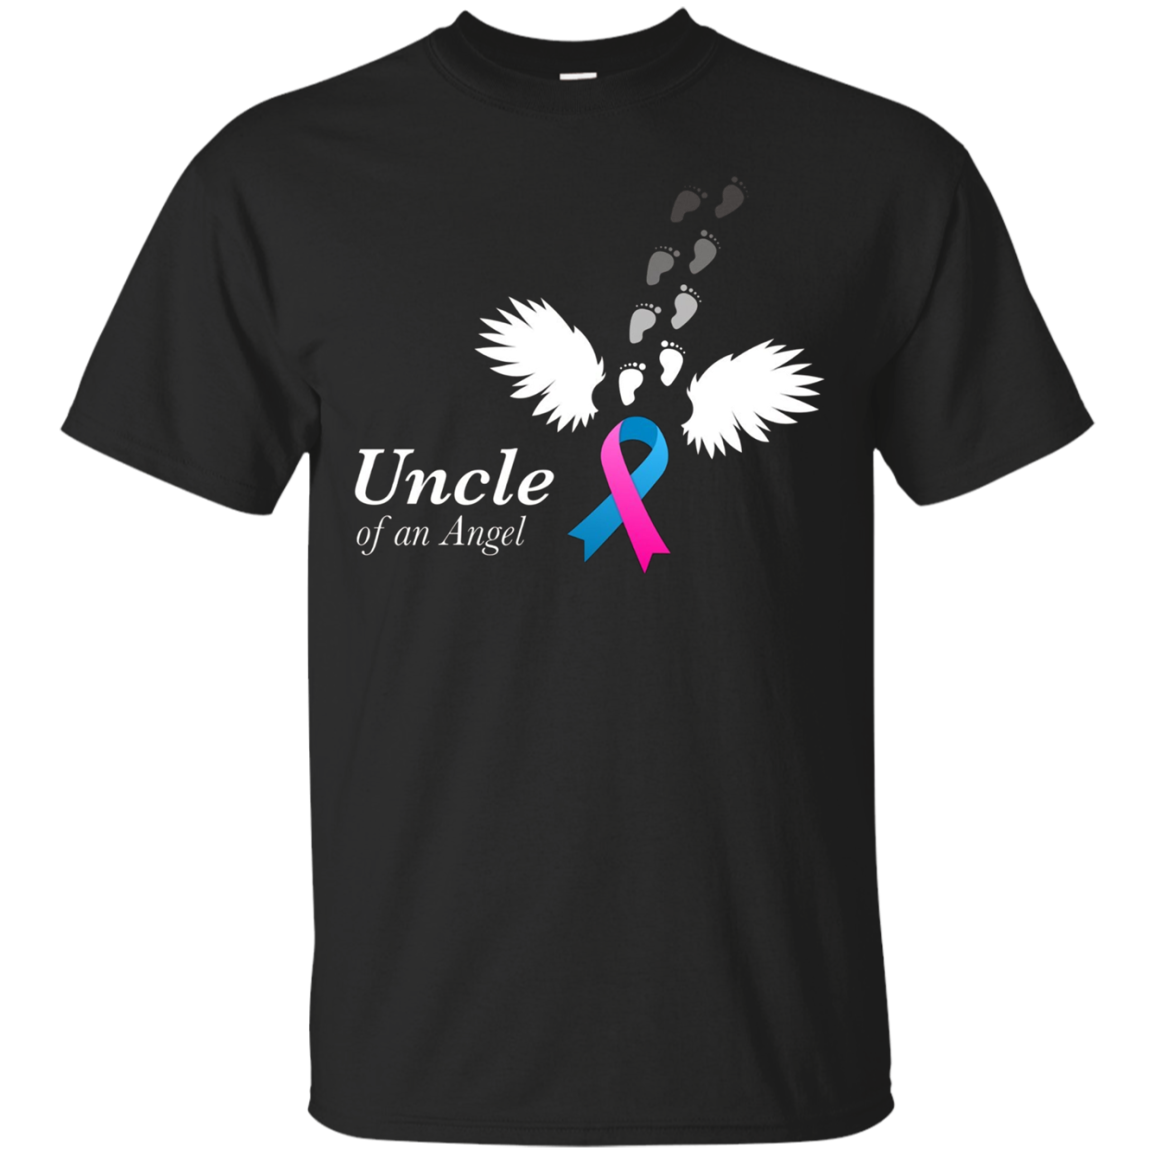 Angel Uncle T-shirt. Miscarriage Awareness Infant Loss